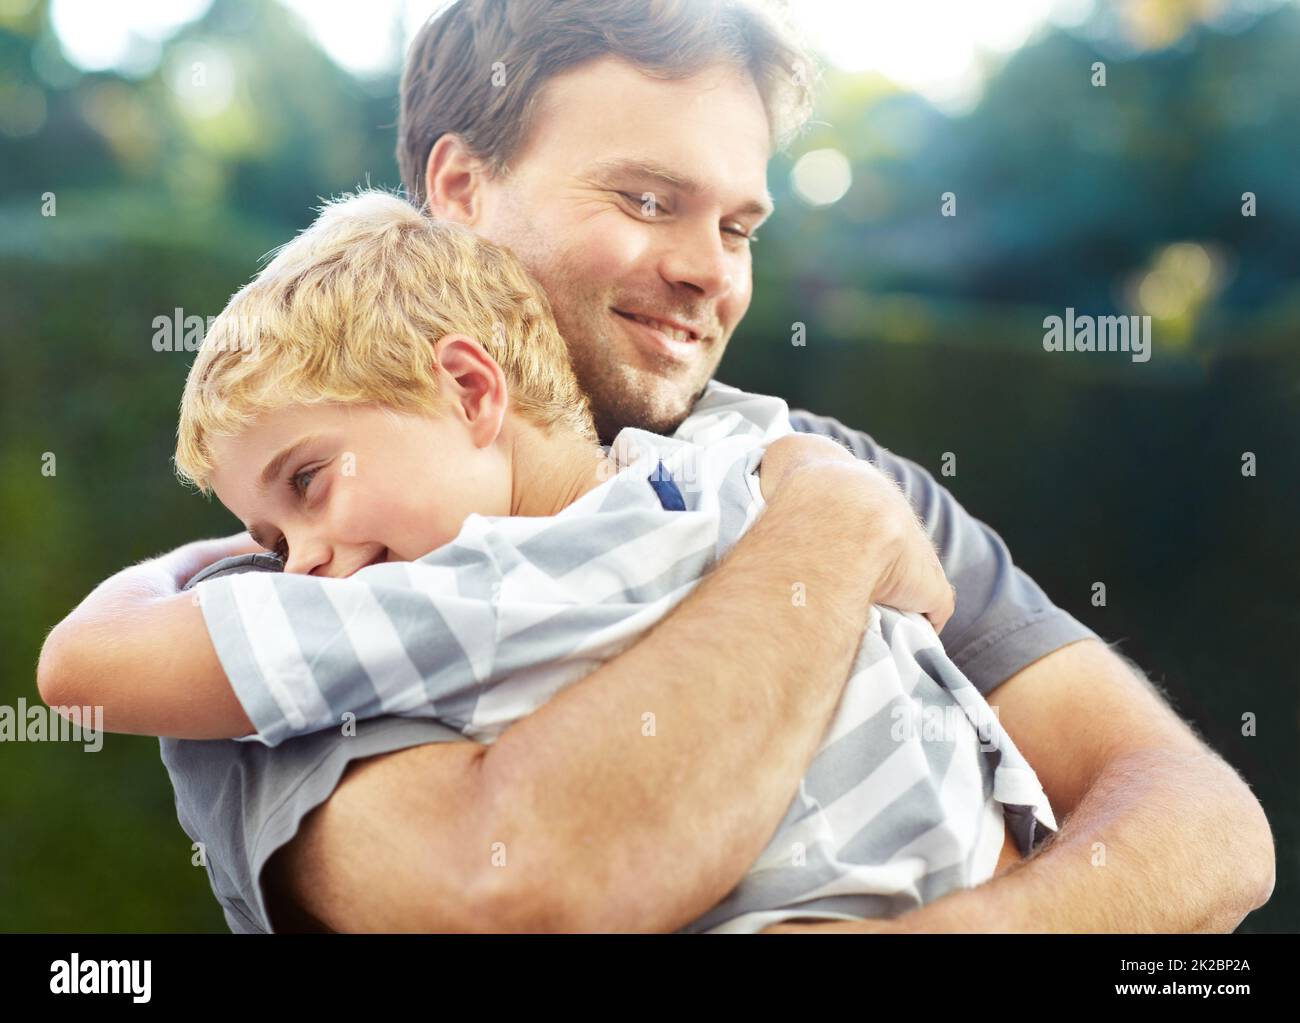 Daddys boy. Shot of a smiling father hugging his son outside. Stock Photo